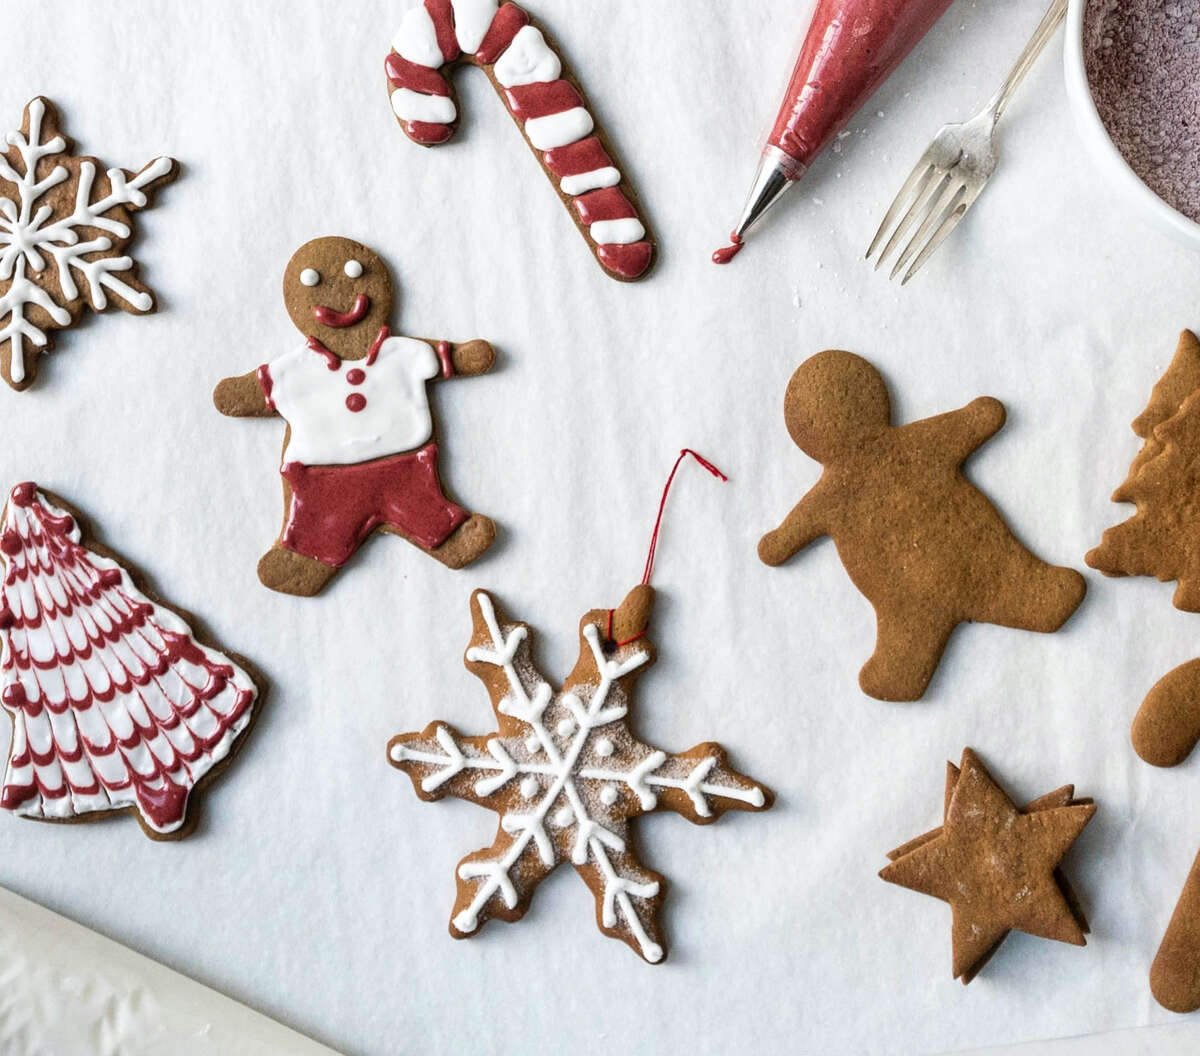 Perfume your house with the sweet scent of pepperkaker, Norwegian gingerbread cookies that you can shape into ornaments, gingerbread houses, or cookies to eat immediately. 